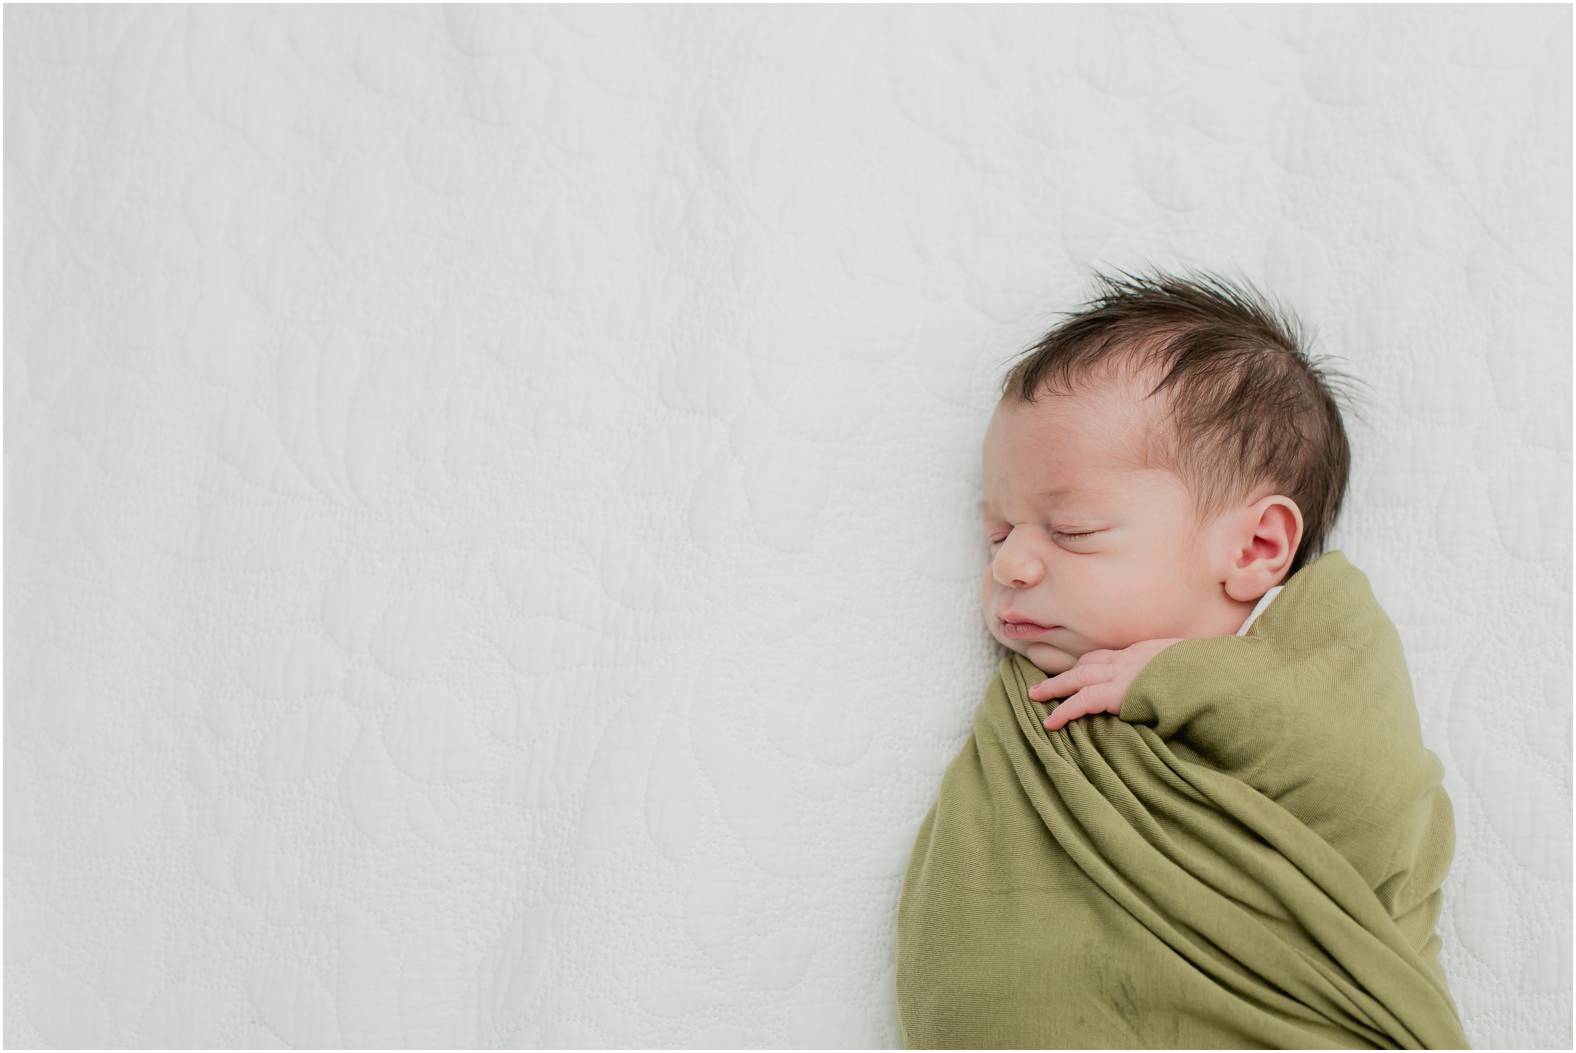 Newborn baby boy swaddled in olive green blanket poses for newborn photoshoot done in the home.